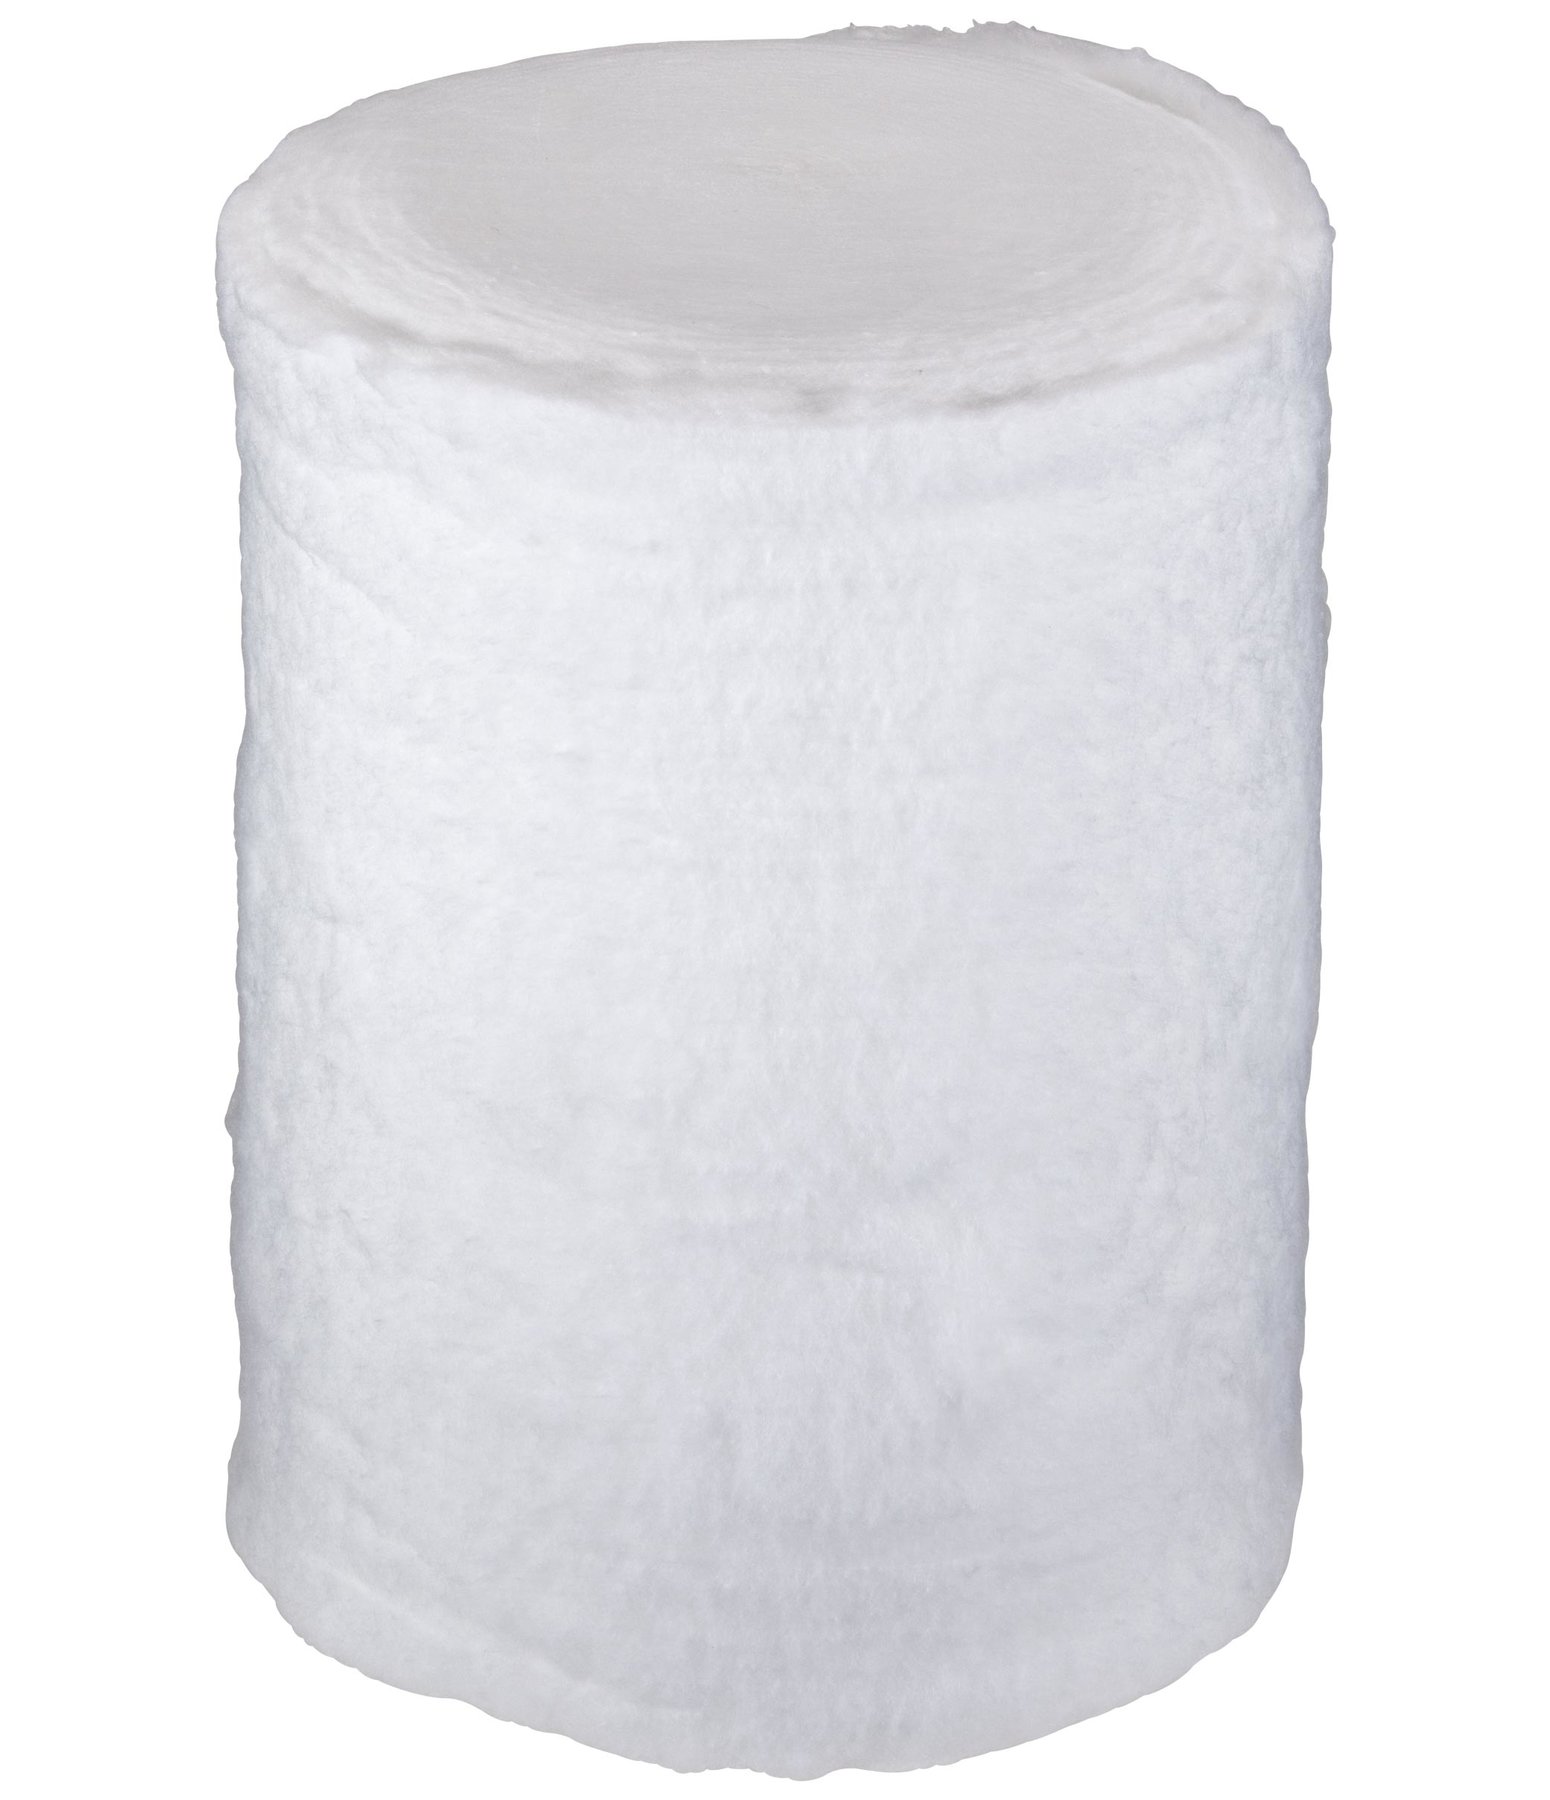 Veterol Medical Bandage Cotton Wool without Intermediate Layer